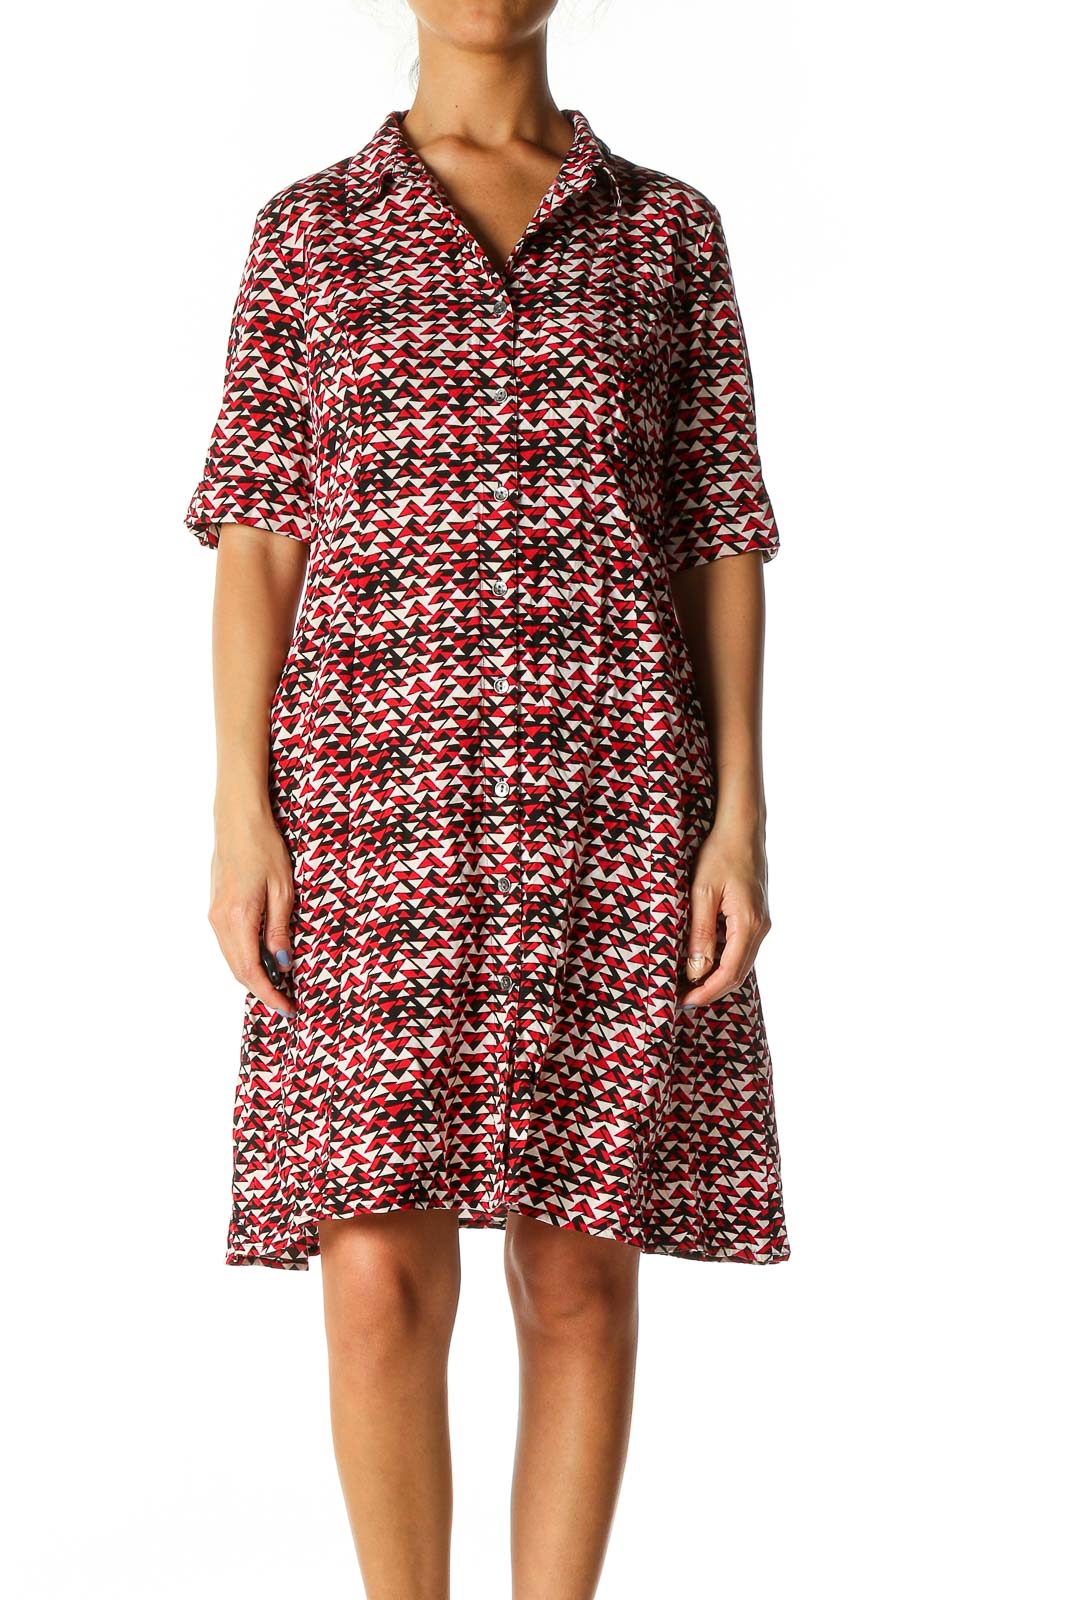 Red Geometric Print Casual A-Line Dress Front